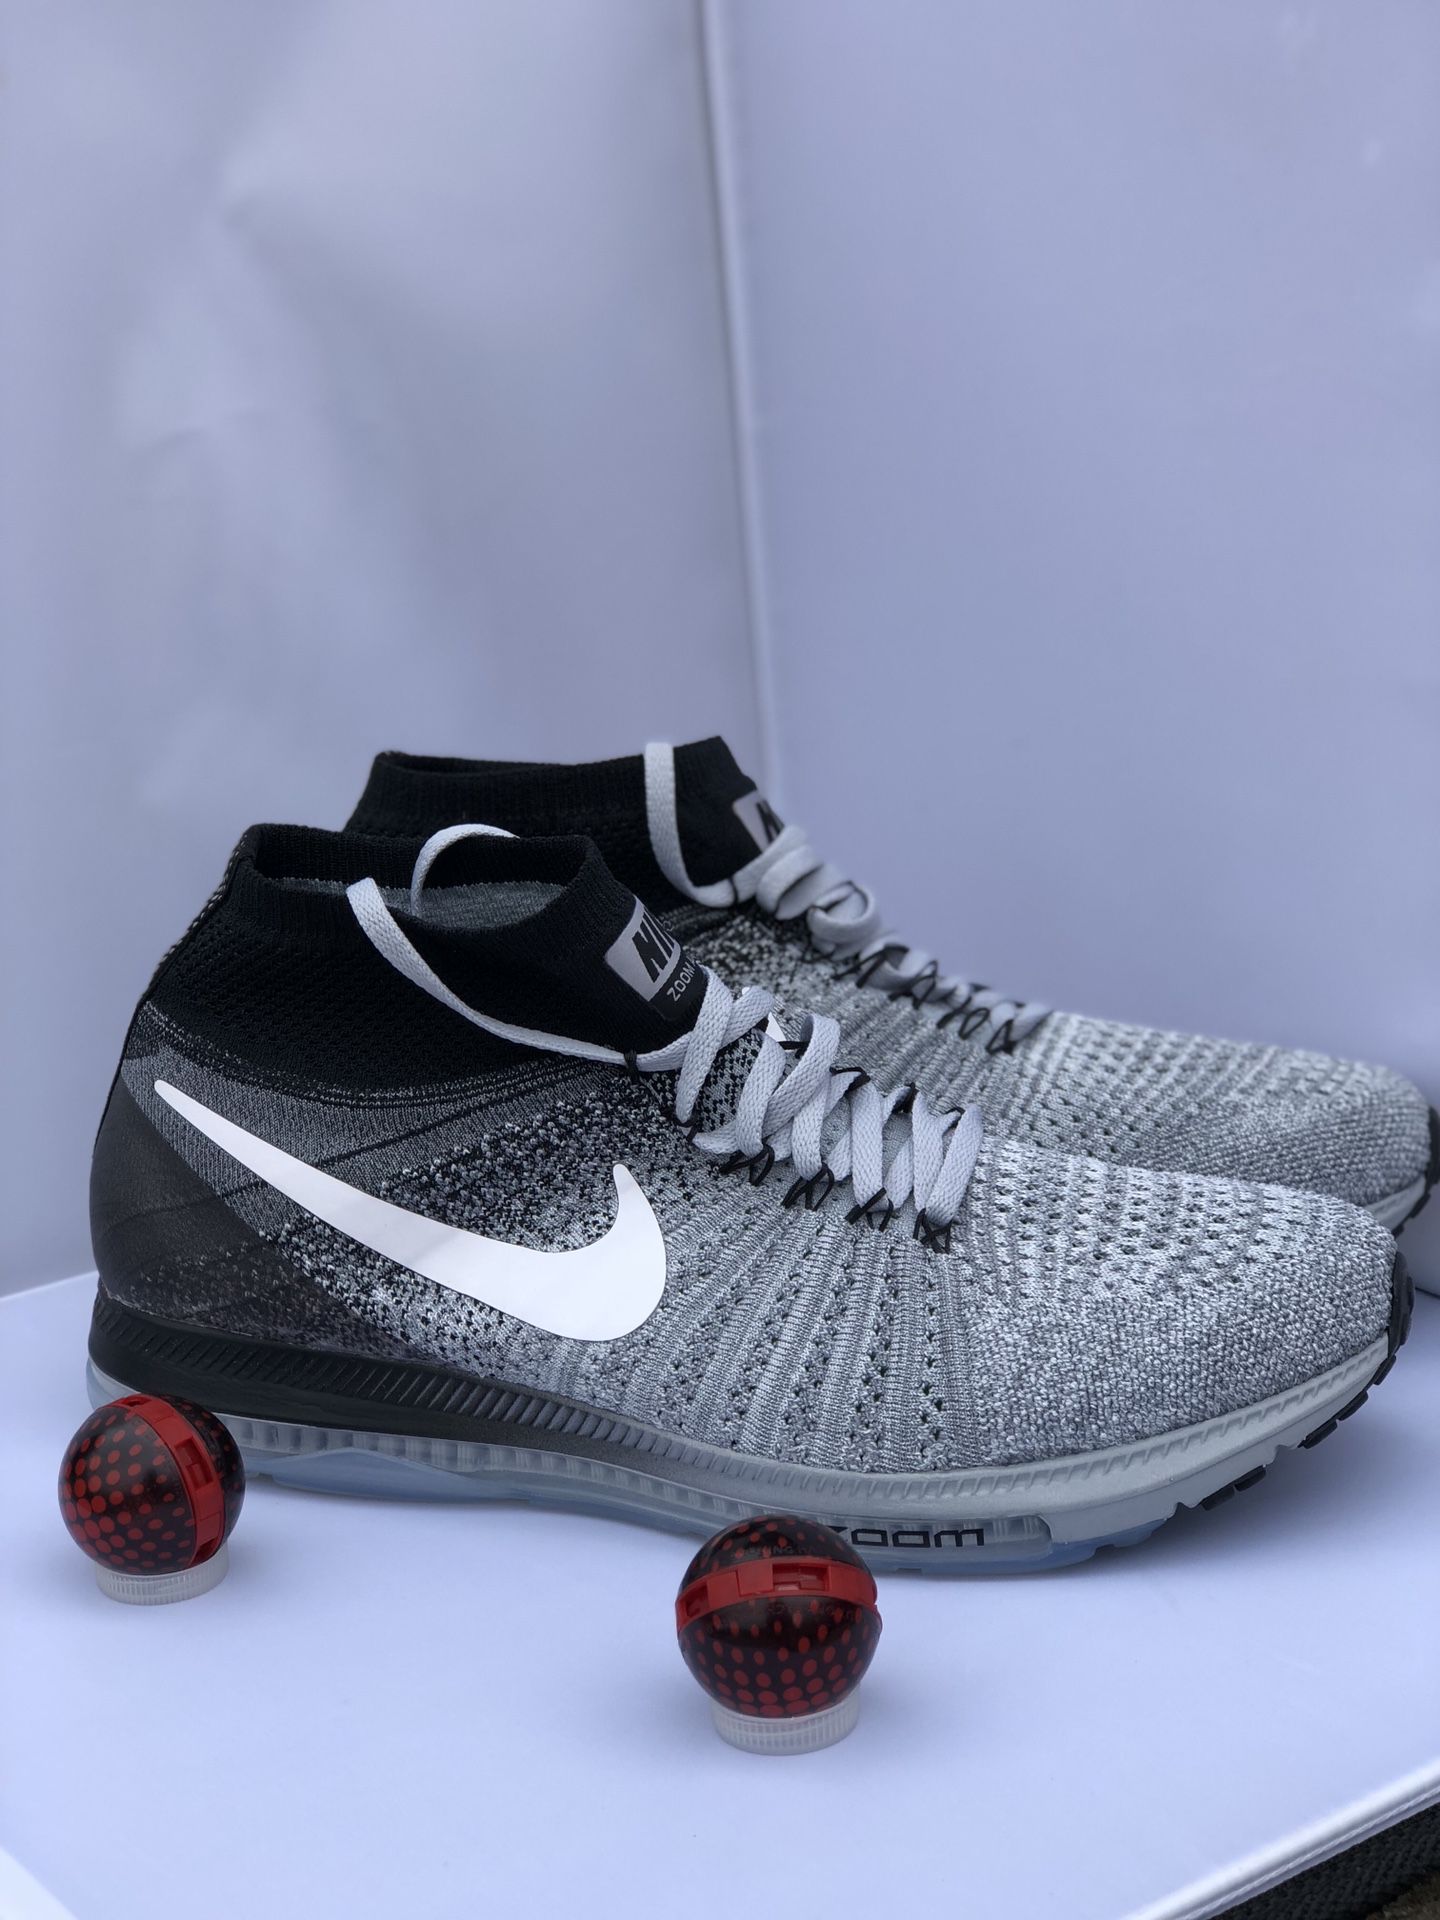 Nike Zoom All Out Flyknit Men’s Size 10.5 Running Wolf Grey White Black 844134-003